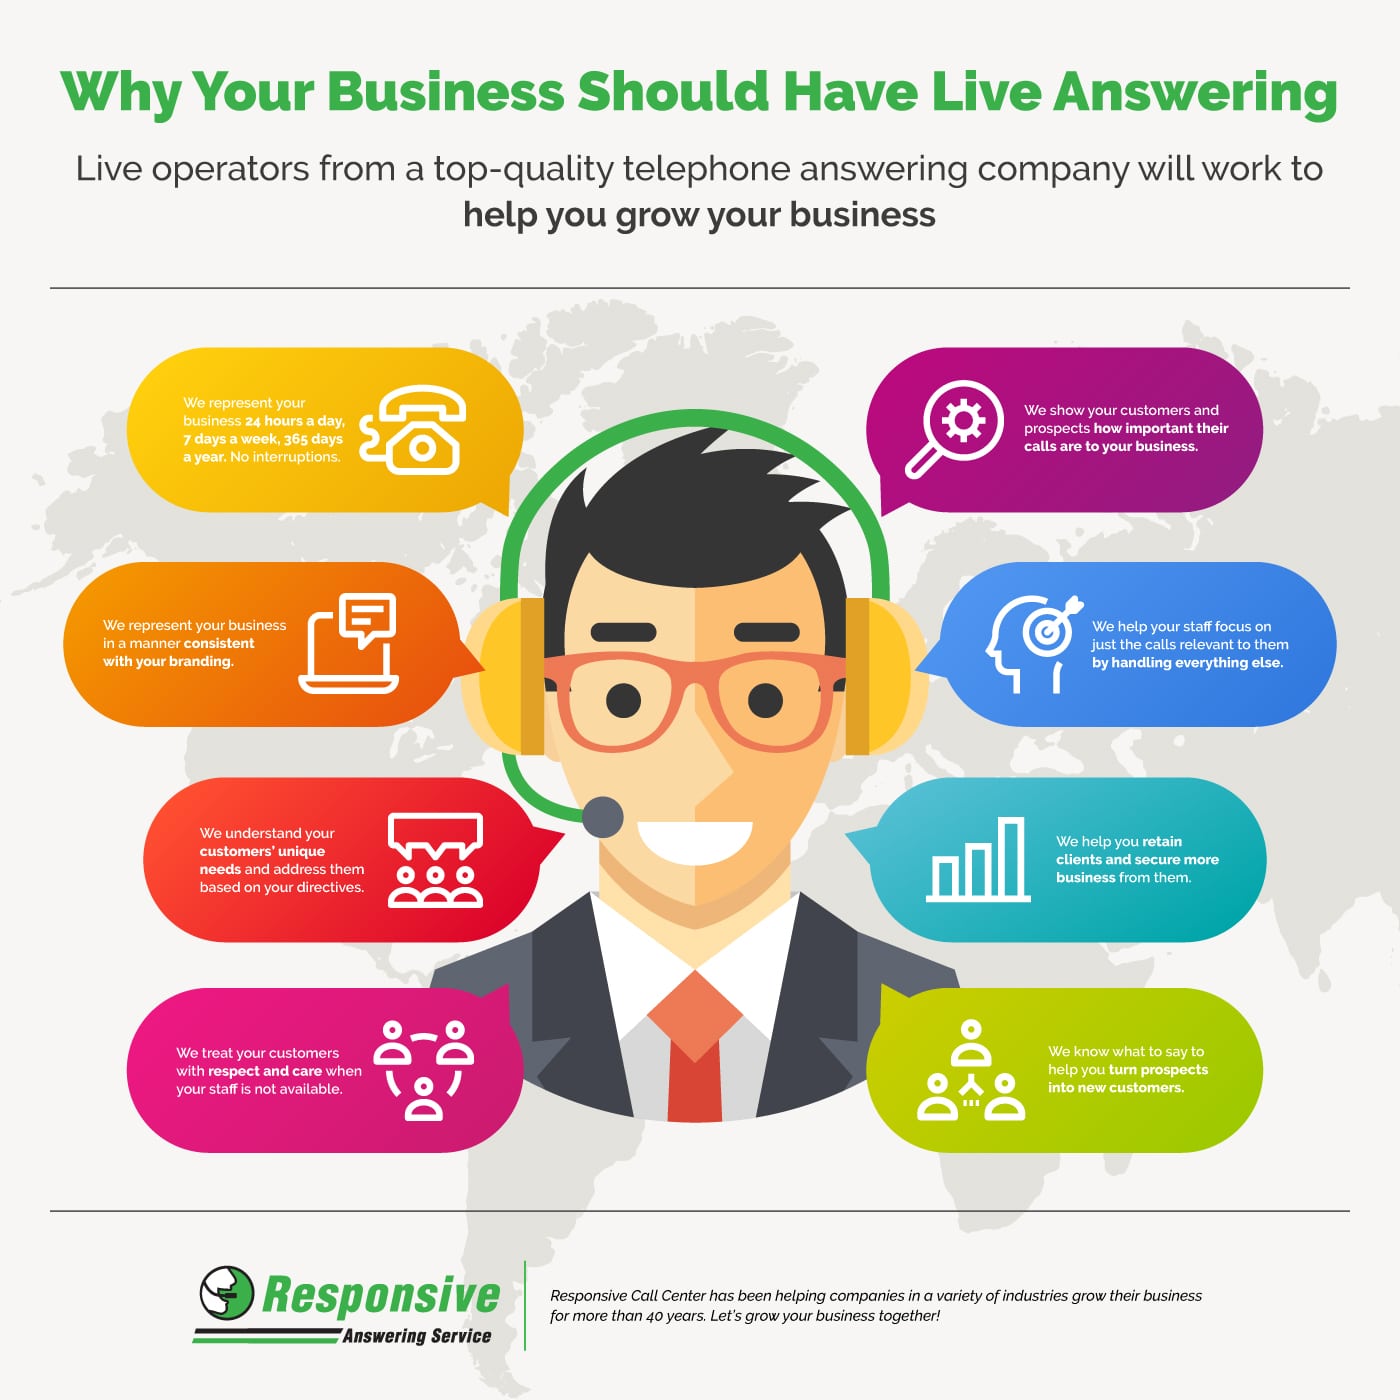 Why Your Business Should Have Live Answering Service